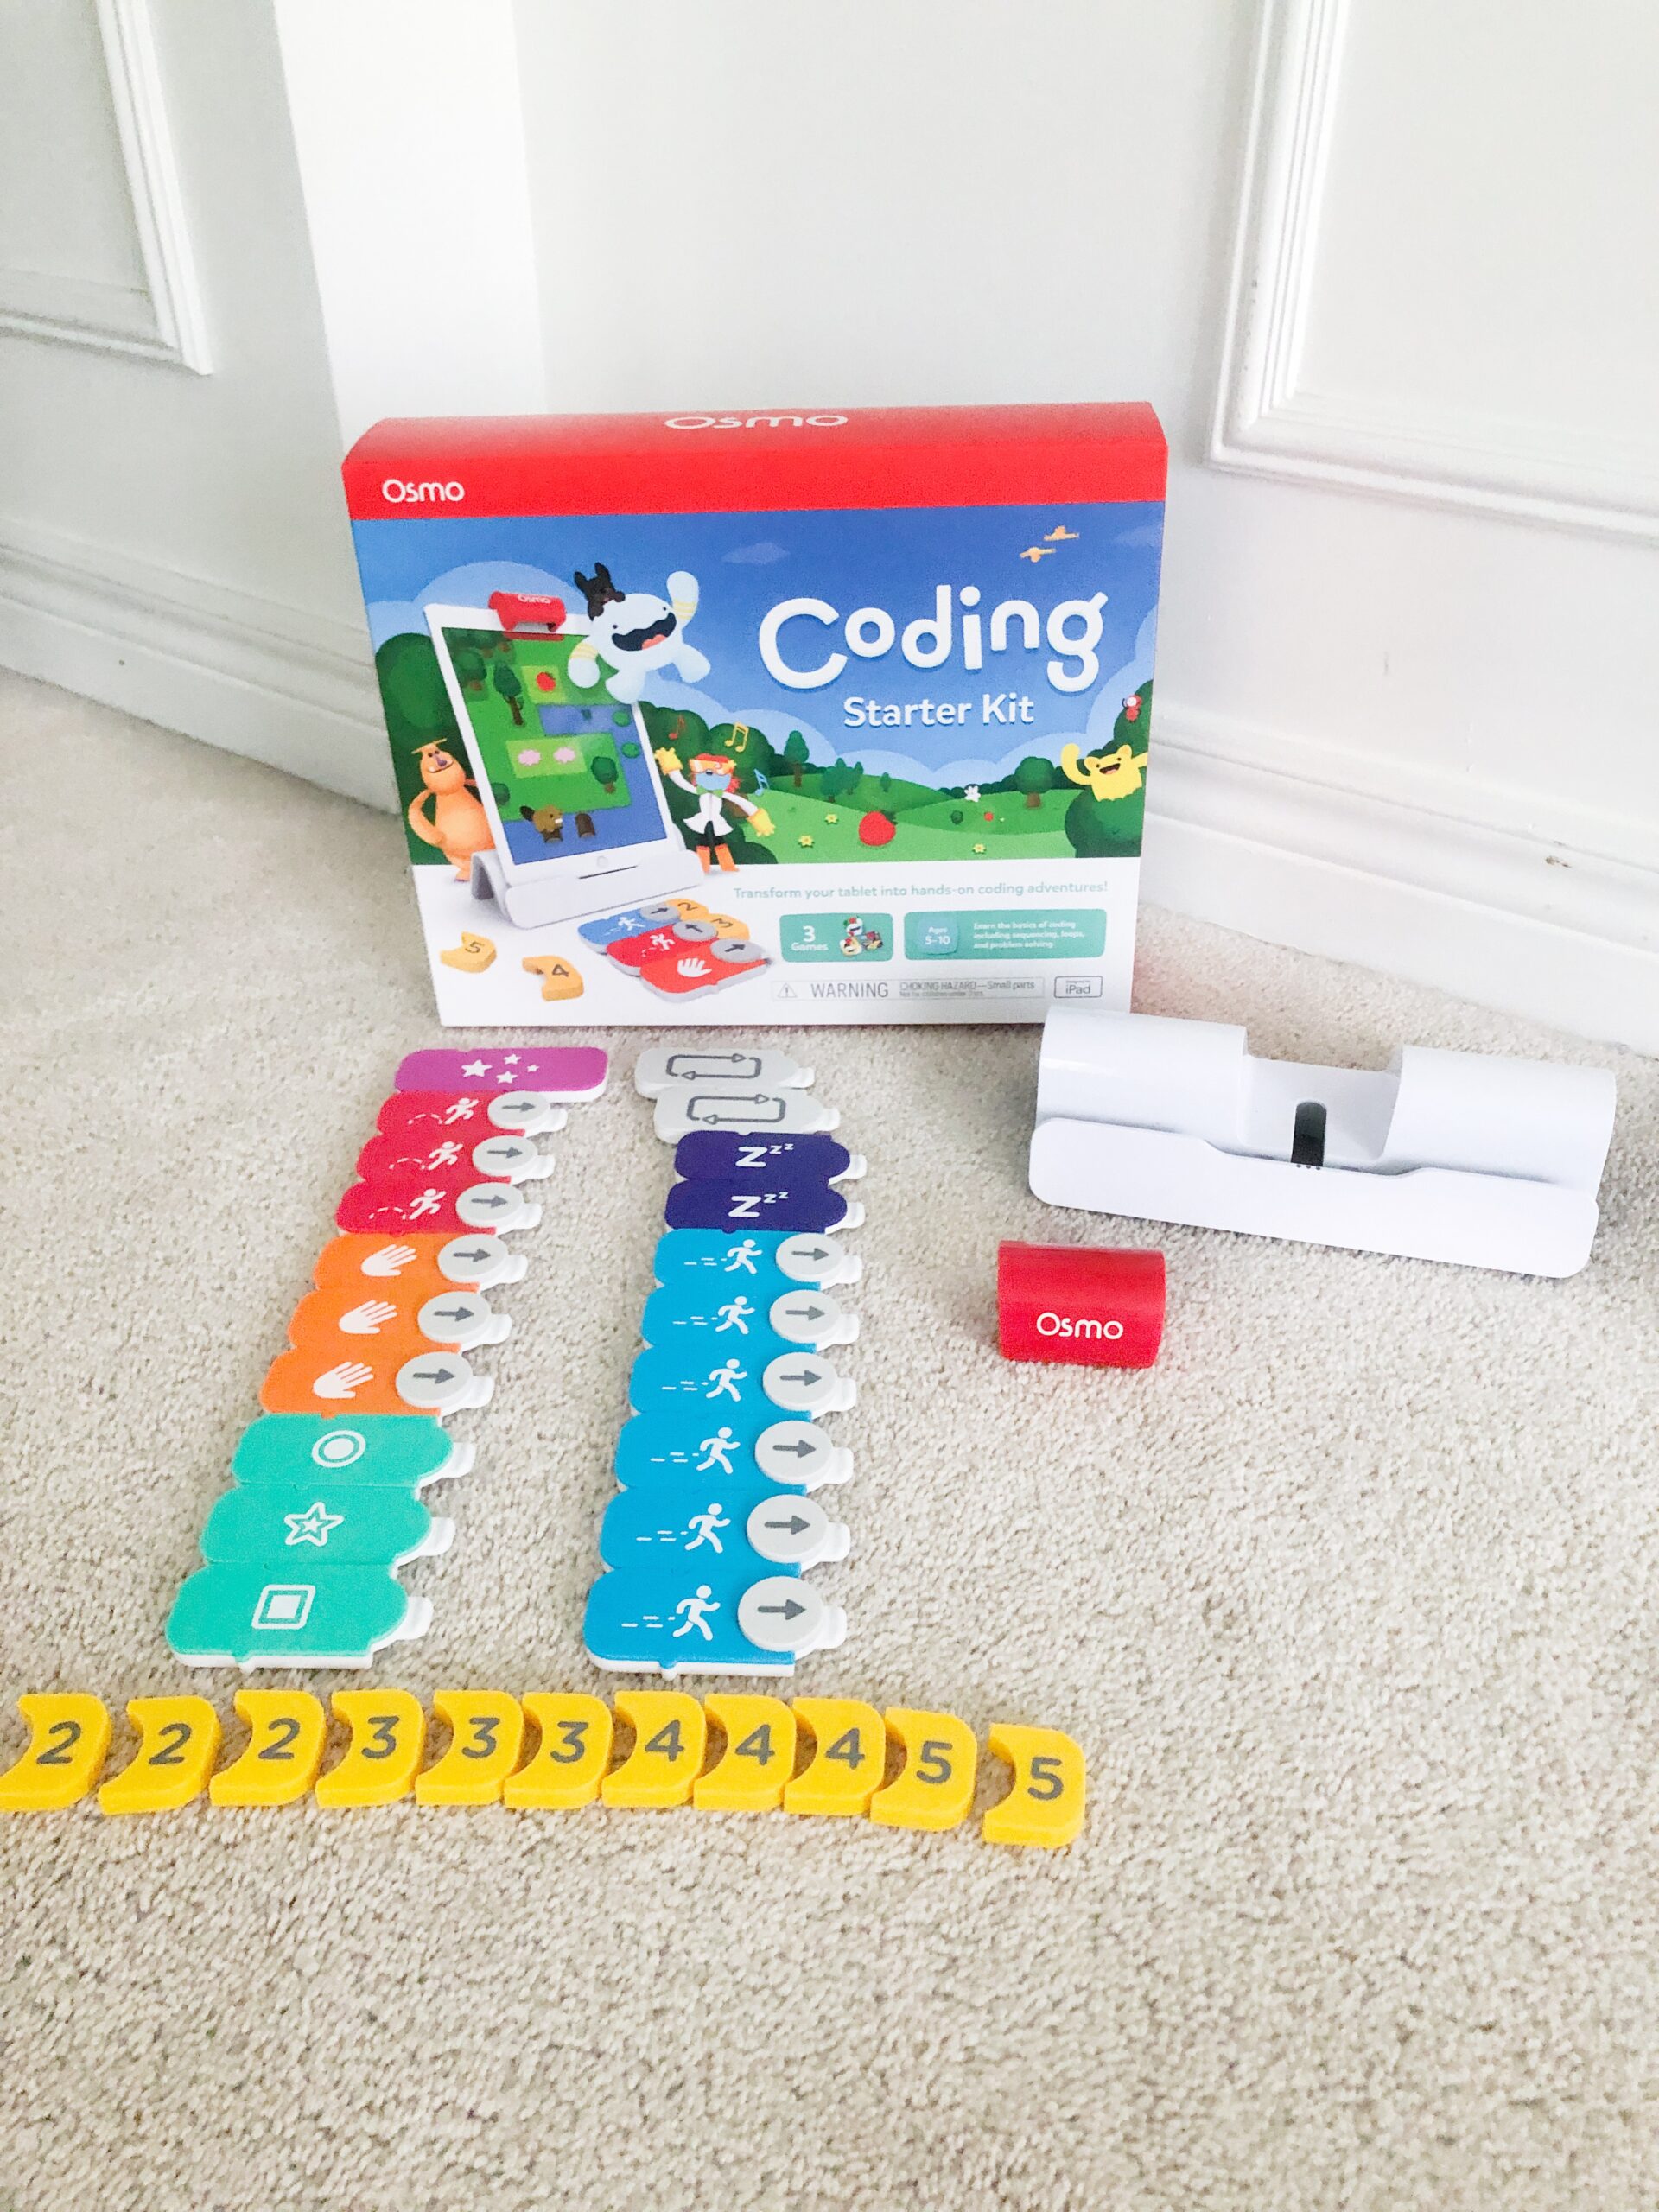 Osmo Coding Starter Kit Review On Livin' Life with Style